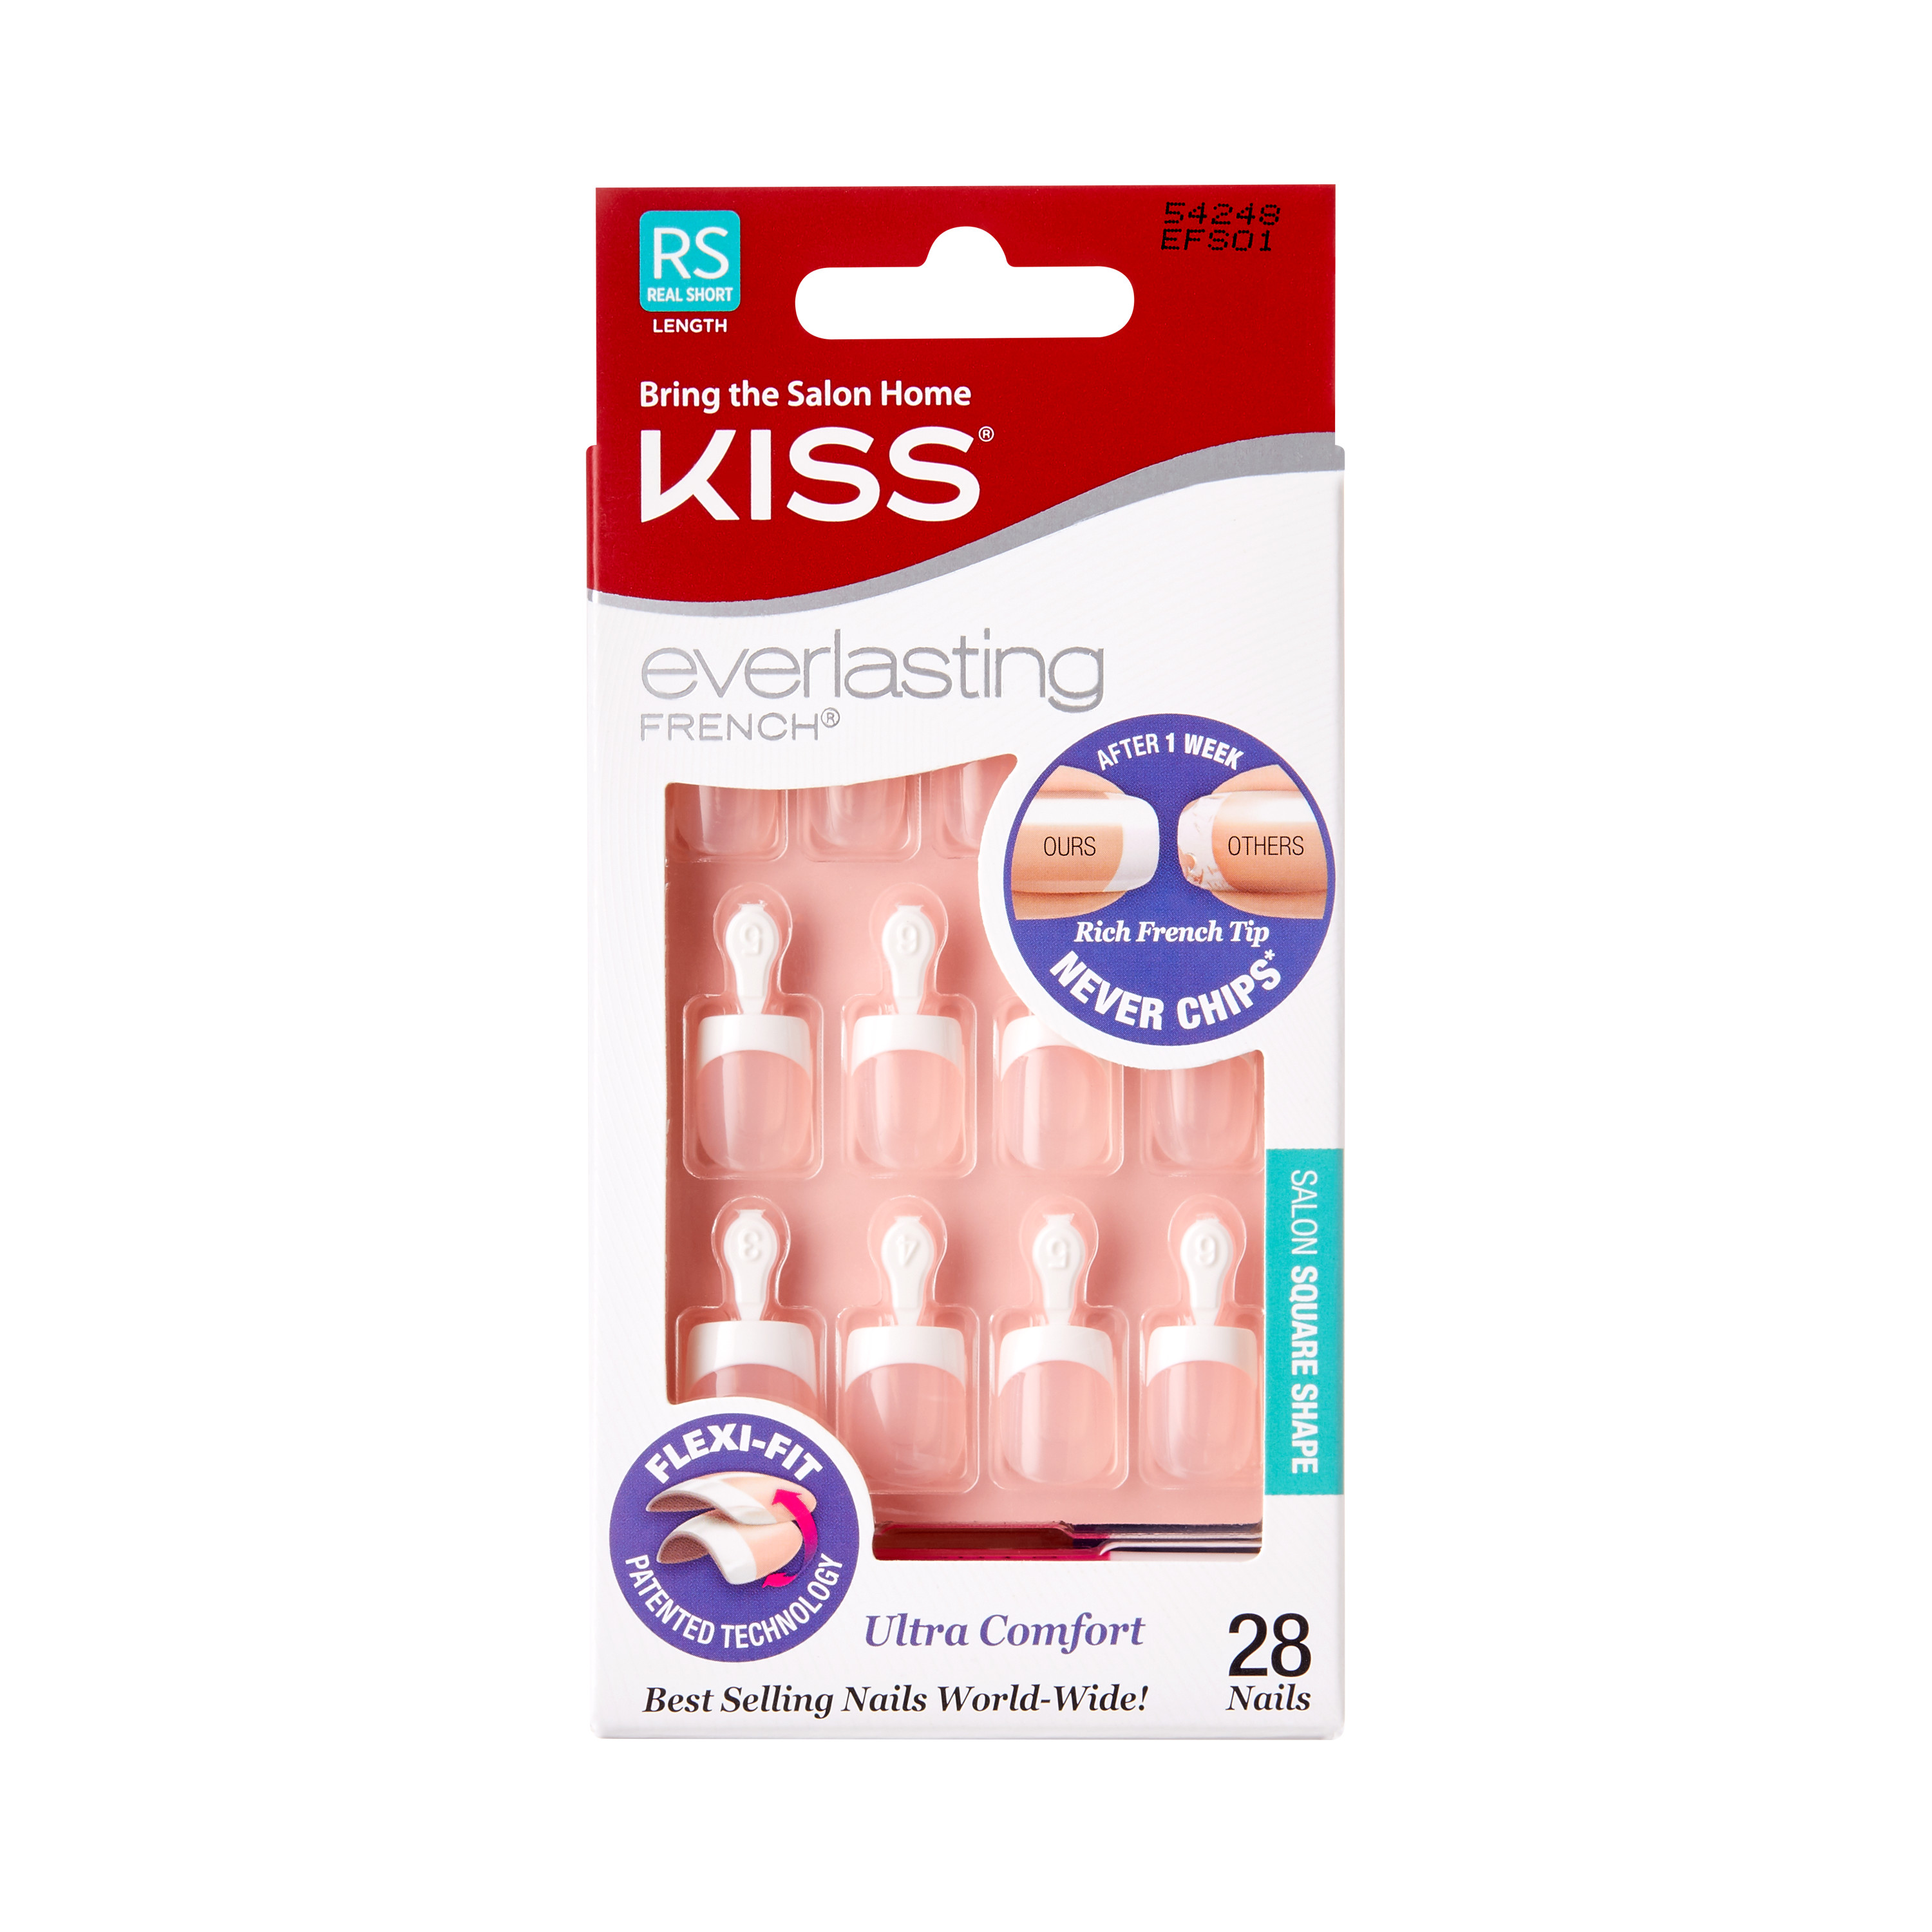 Kiss Everlasting French Nails - Clear Pink - image 1 of 9